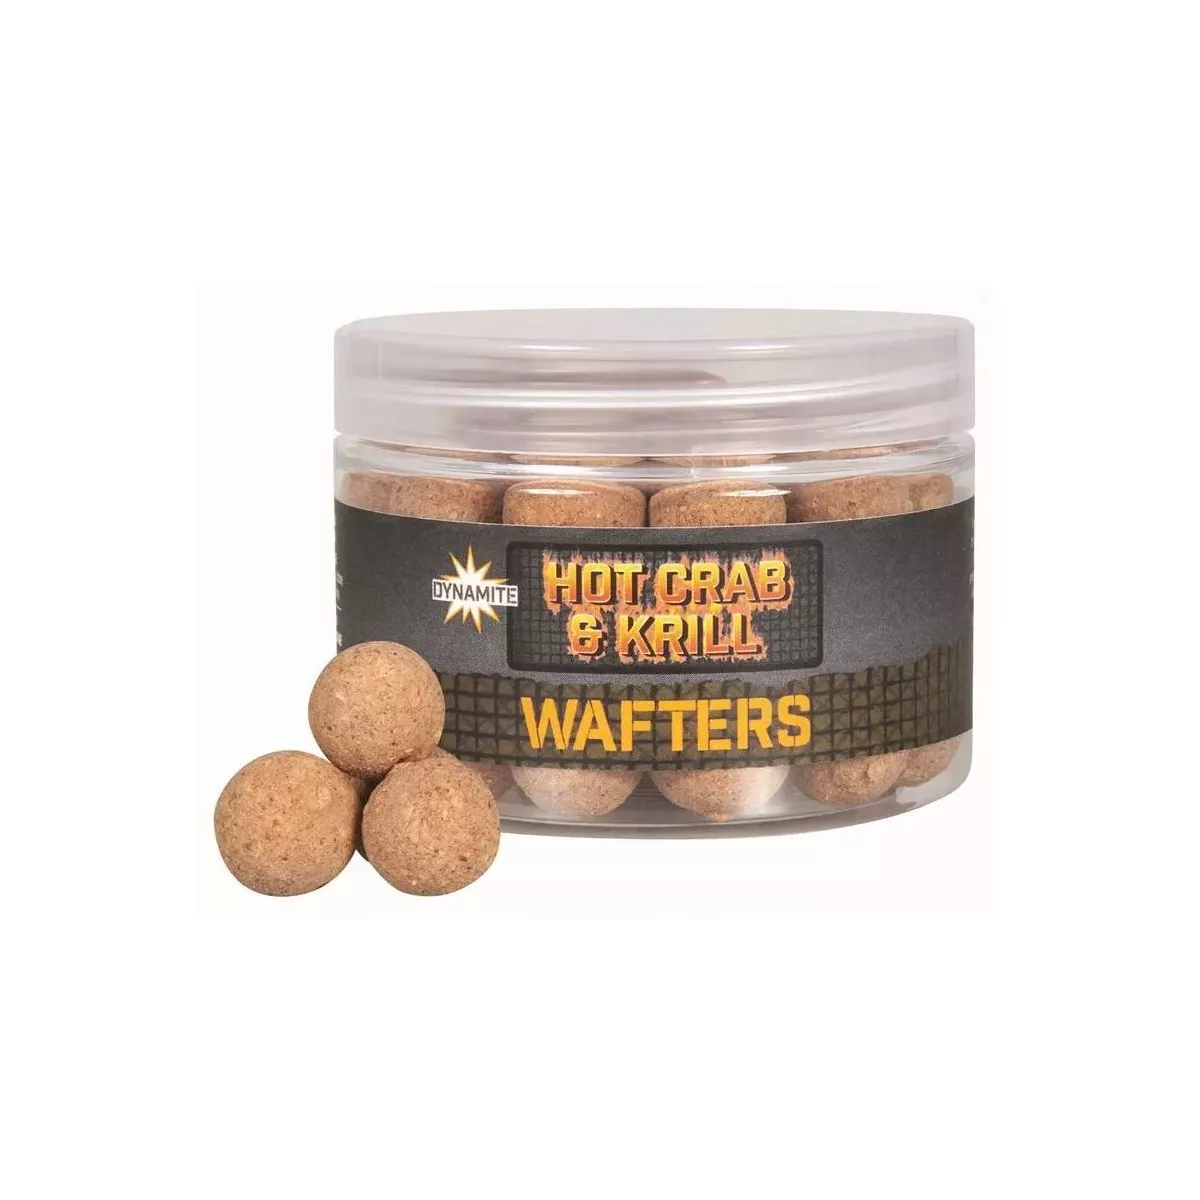 DY1696 Waftersy Dynamite Baits 15mm - Hot Crab & Krill